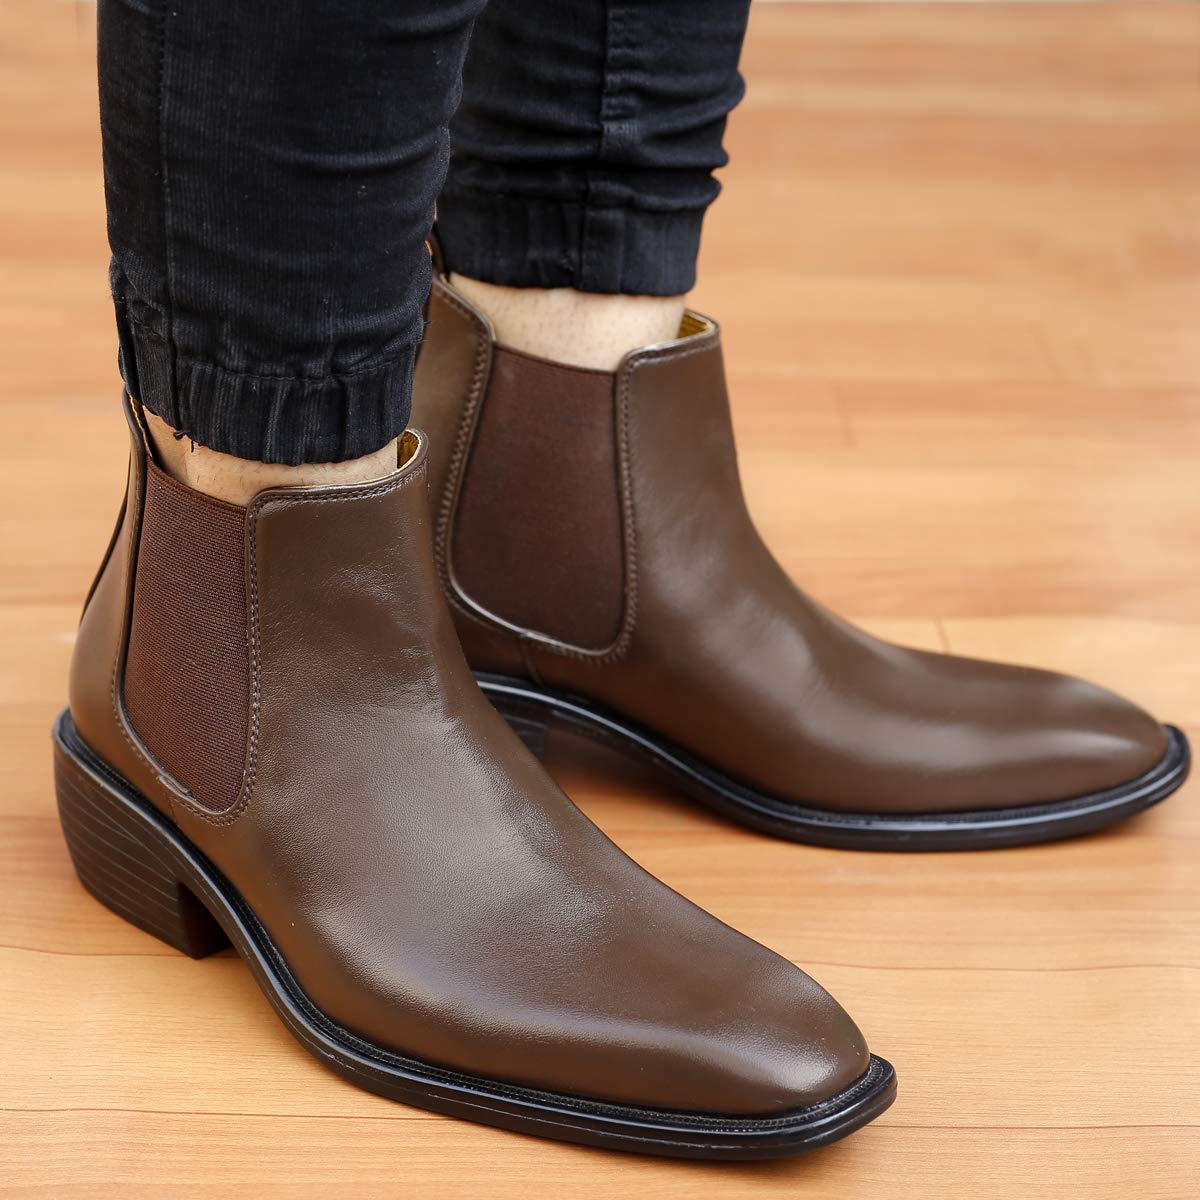 Classy Hight Ankle Height Increasing Brown Chelsea Boots For Men-JonasParamount